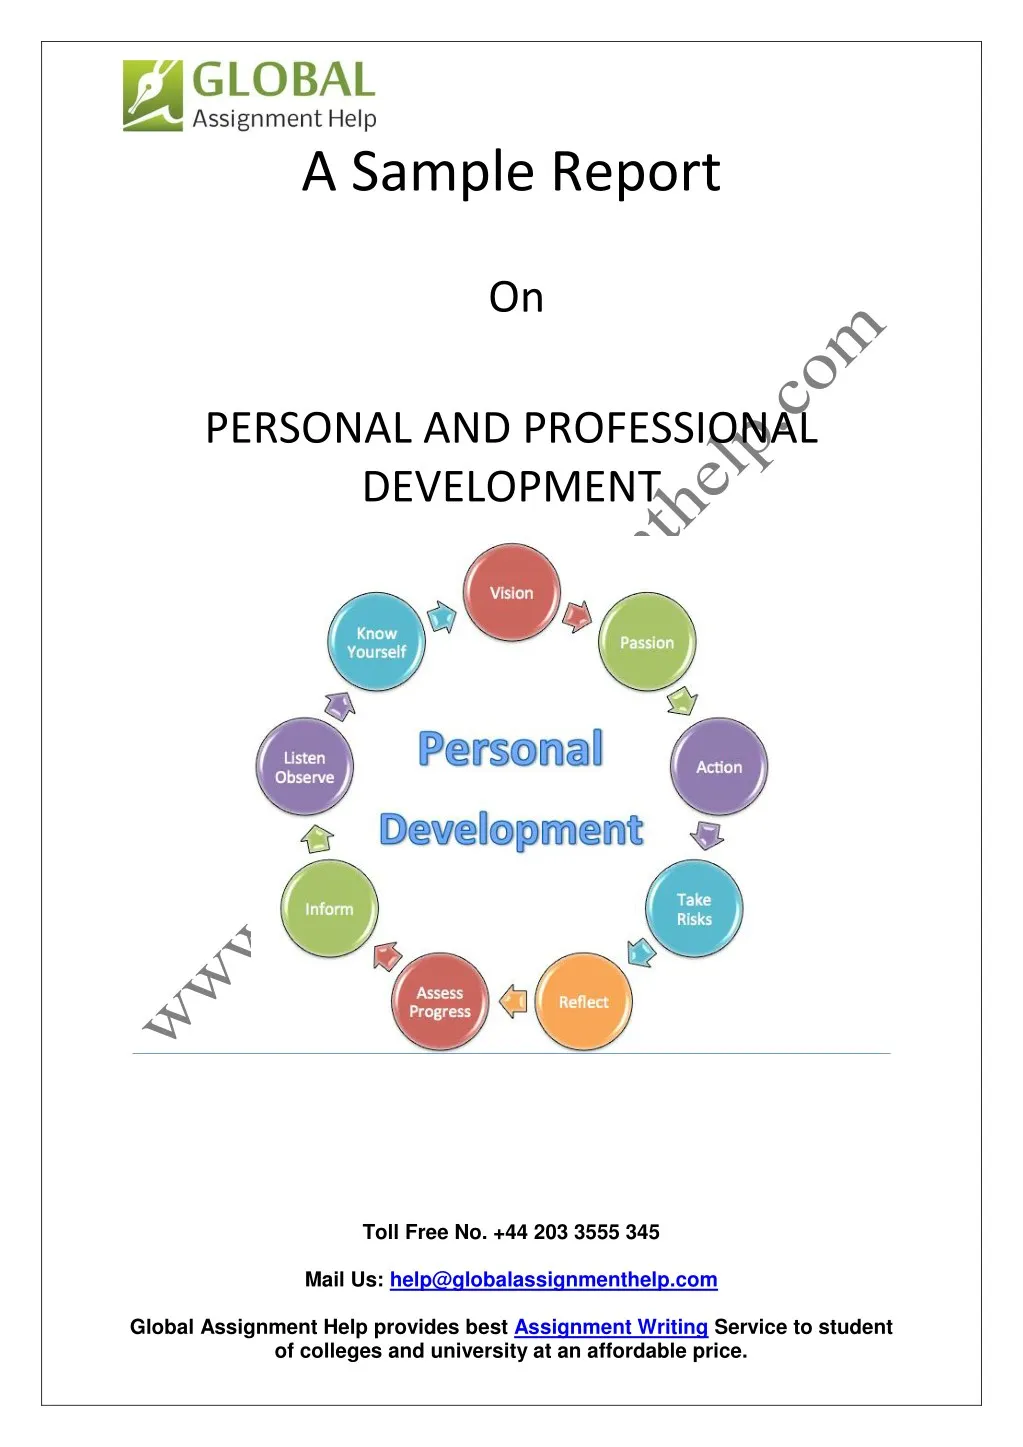 a sample report on personal and professional